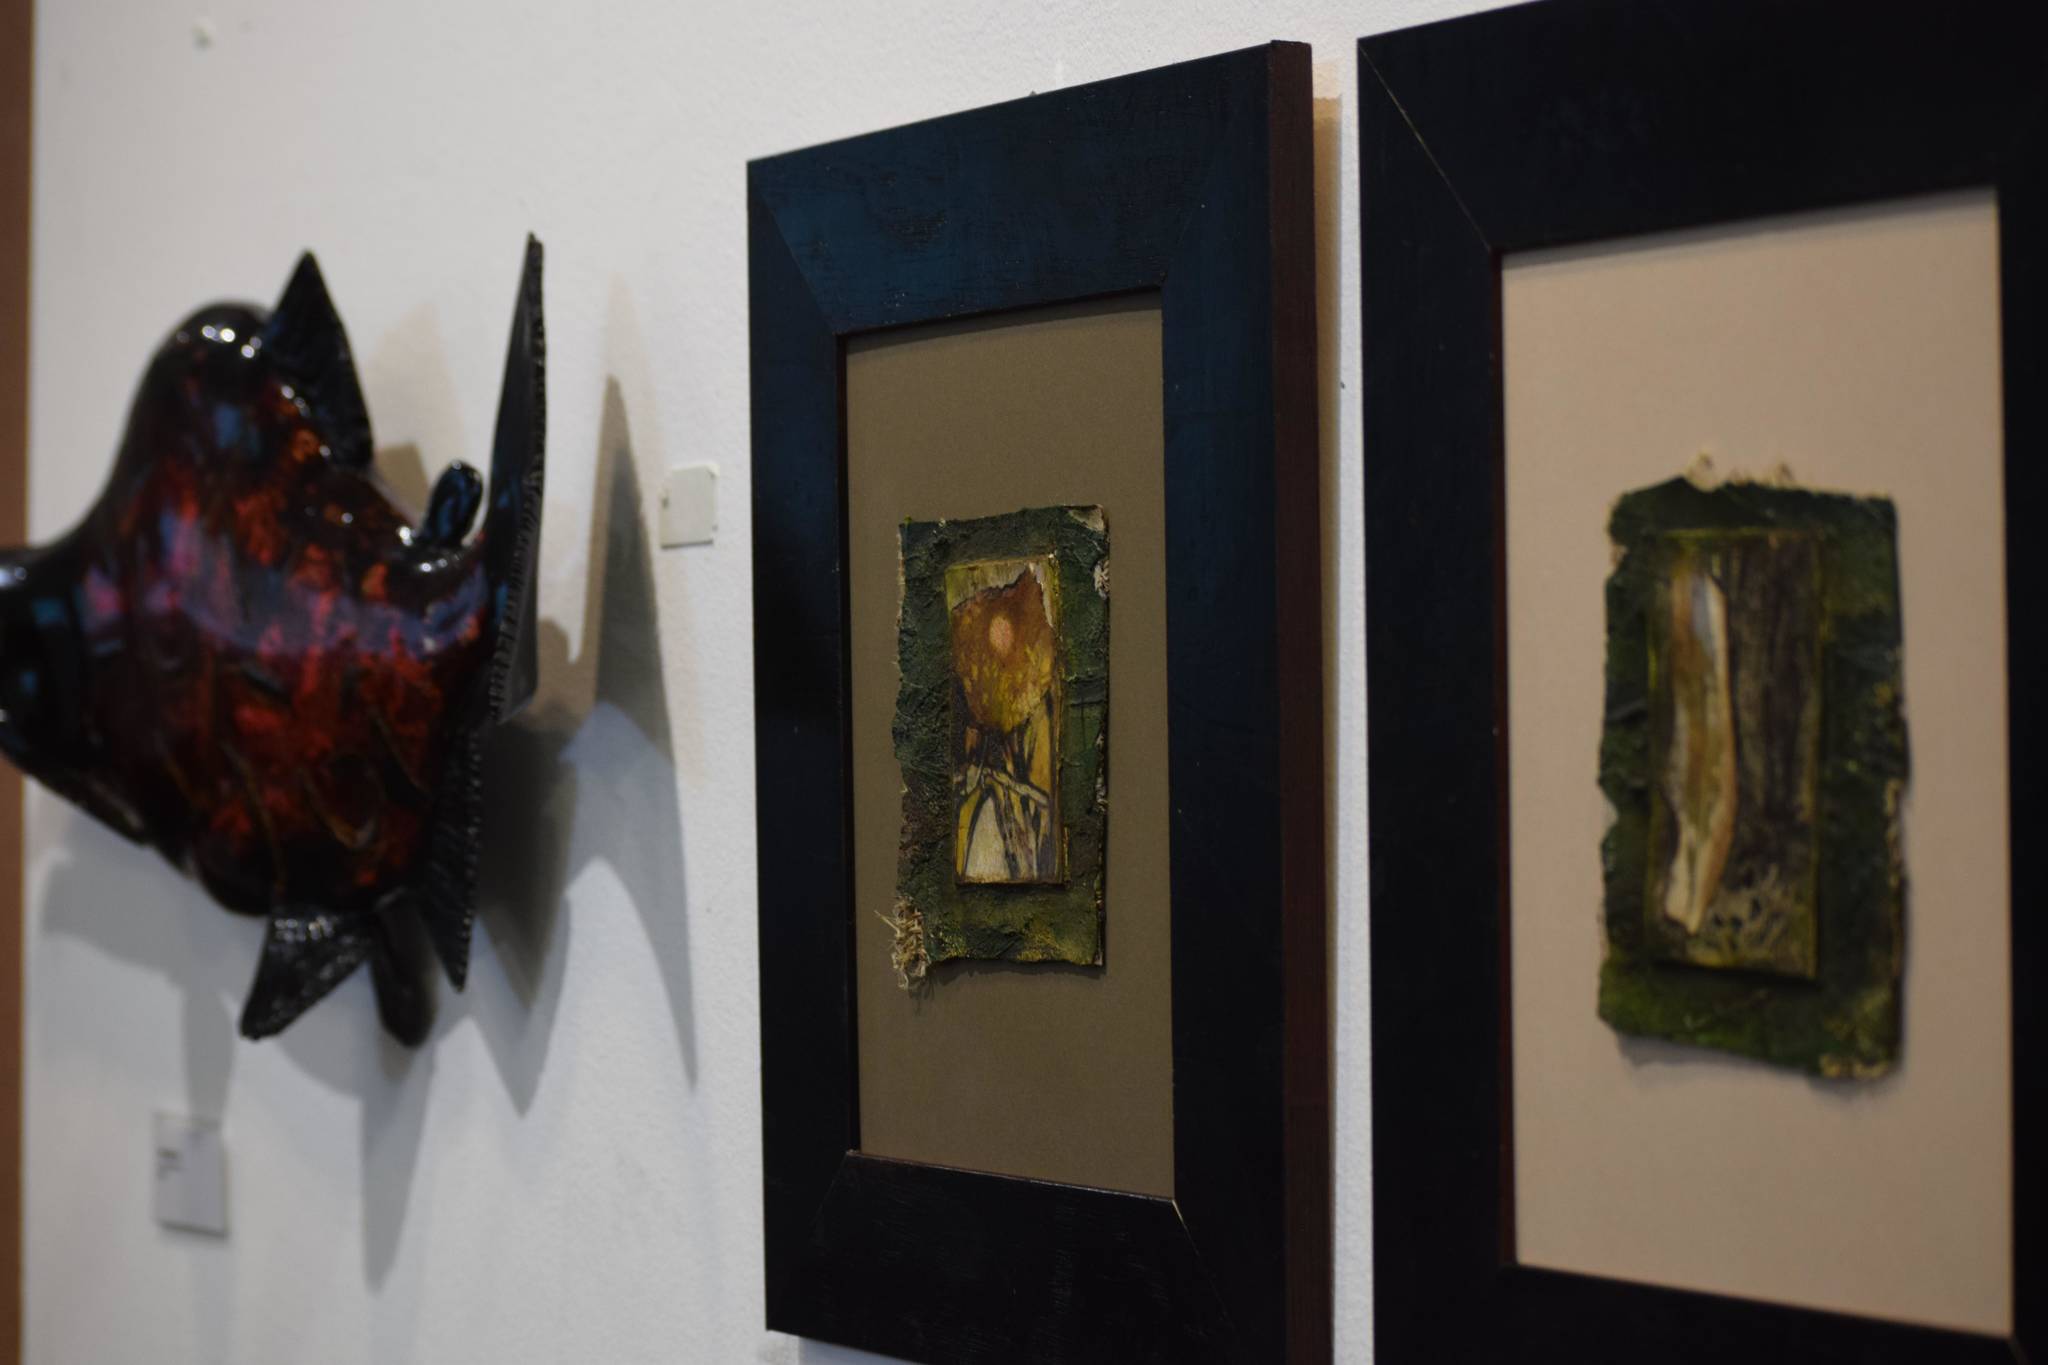 Kathy Matta’s lacquer art pieces are seen on display at the Kenai Chamber of Commerce and Visitor Center on Tuesday, July 27, 2021. (Camille Botello / Peninsula Clarion)